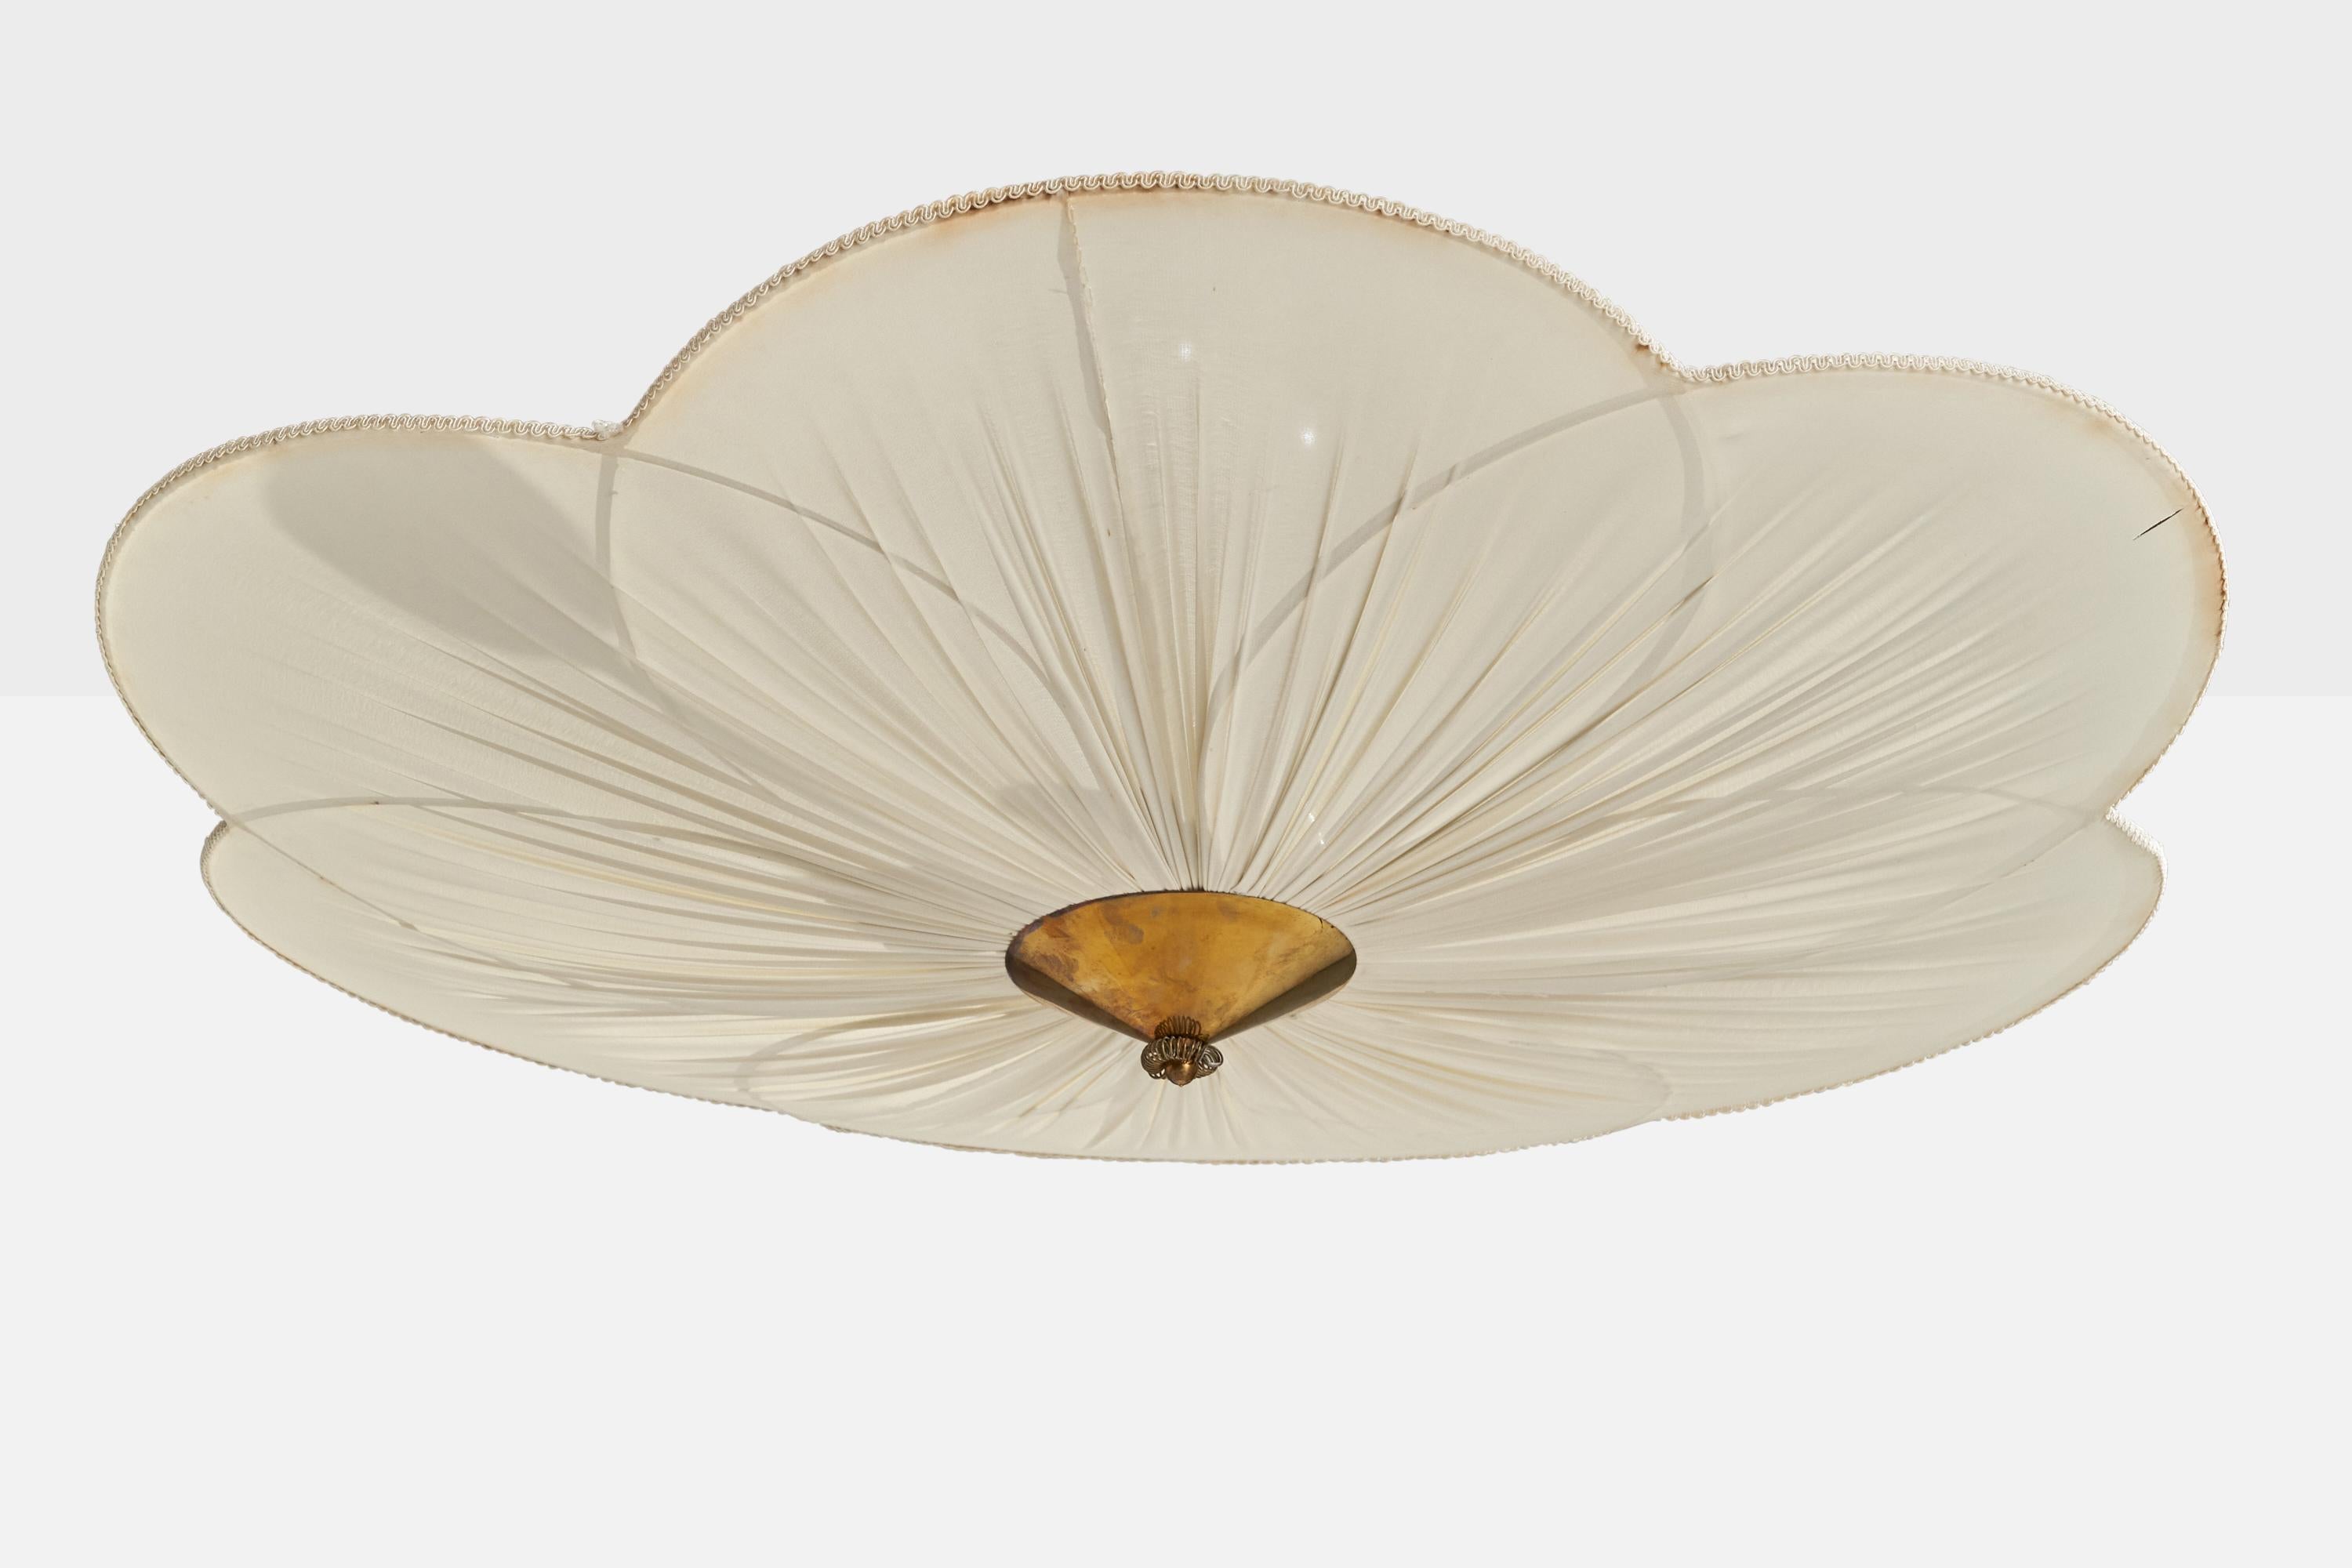 A brass and off-white fabric pendant light designed and produced in Finland, 1940s.

Dimensions of canopy (inches): 4.05” H x 3.07” Diameter
Socket takes standard E-26 bulbs. 3 socket.There is no maximum wattage stated on the fixture. All lighting